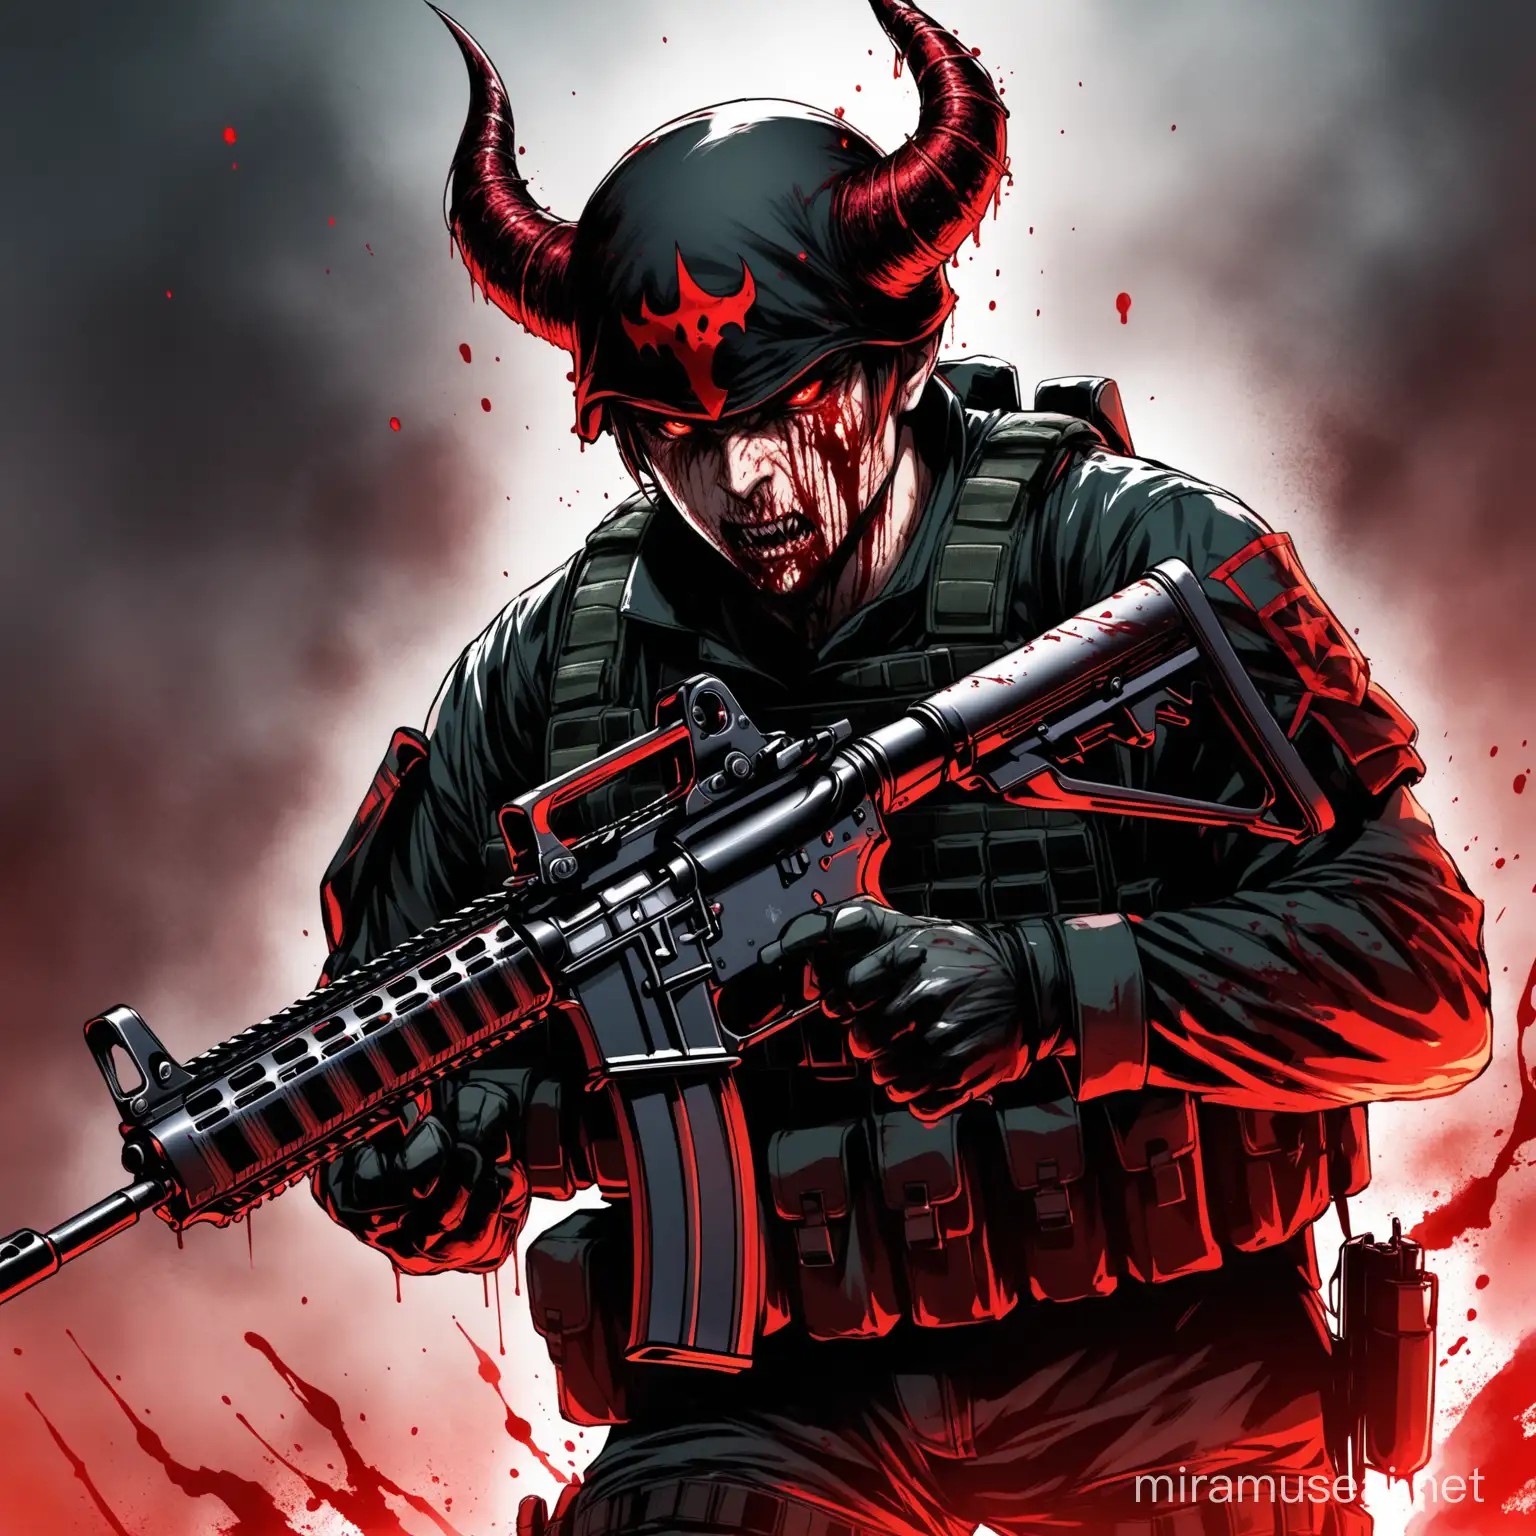 Soldier, Demon horns, blood, red eyes, holding assault rifle 